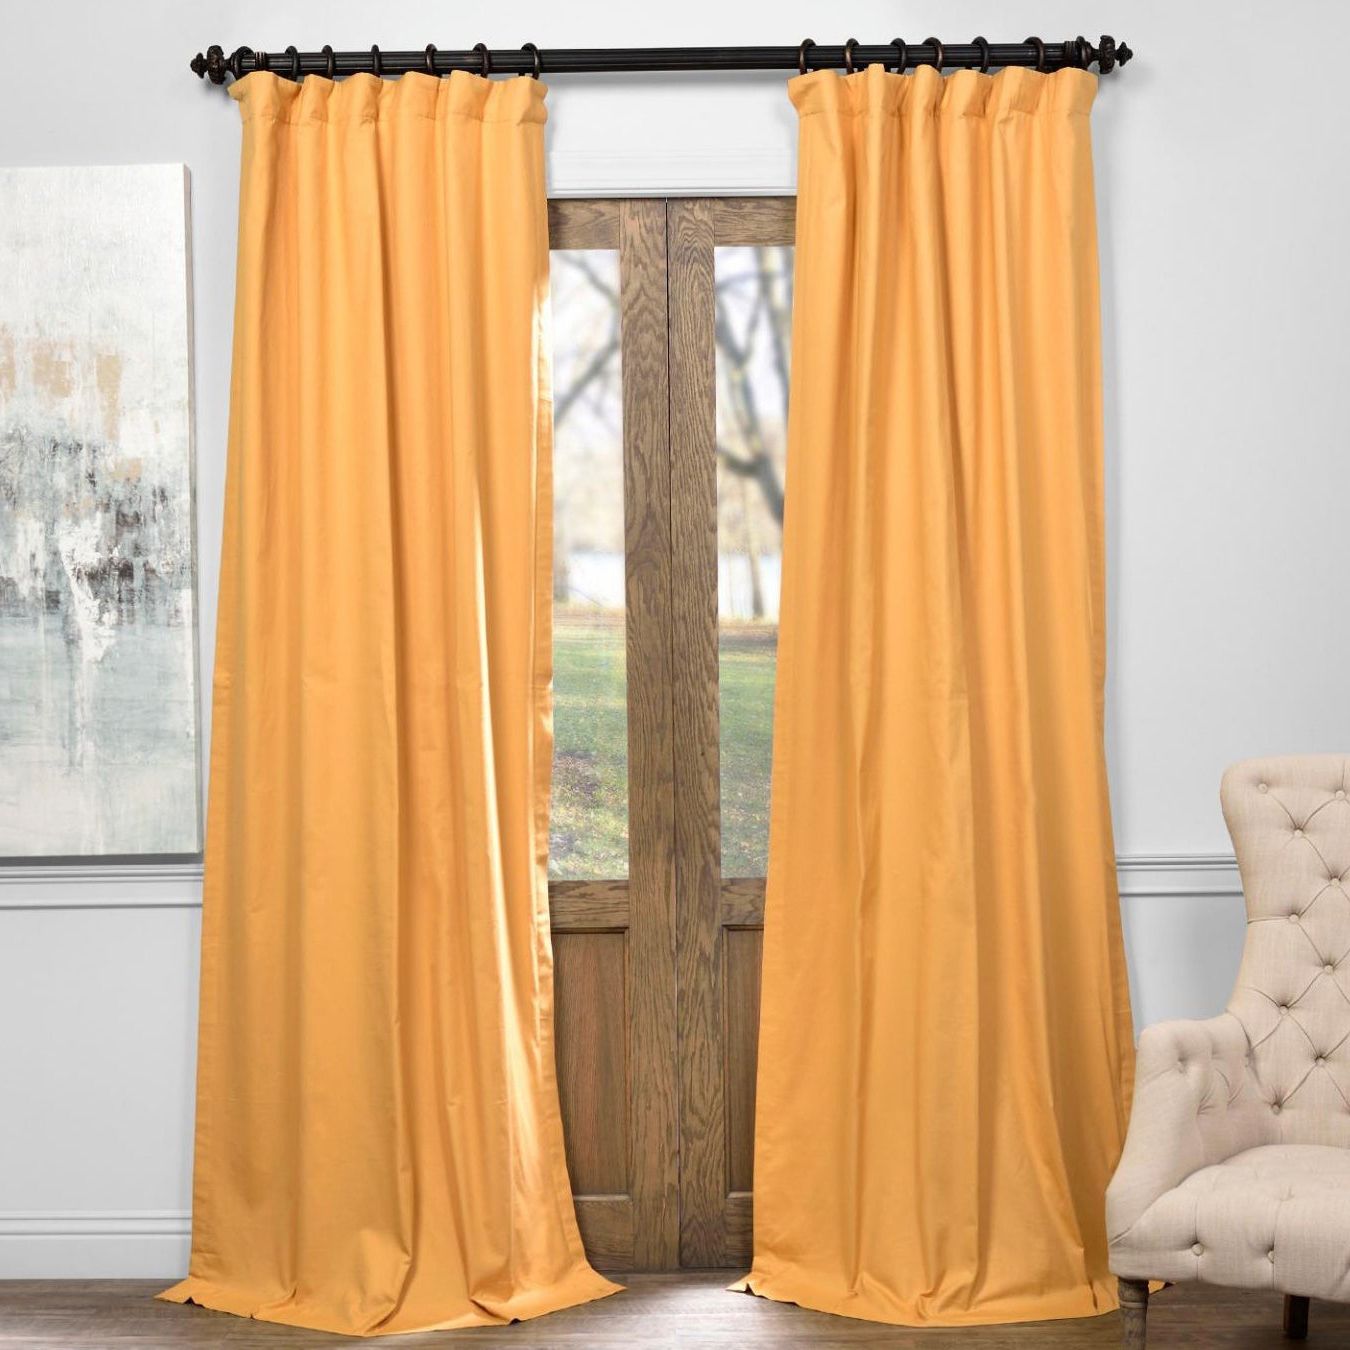 The 20 Best Collection of Solid Cotton True Blackout Curtain Panels